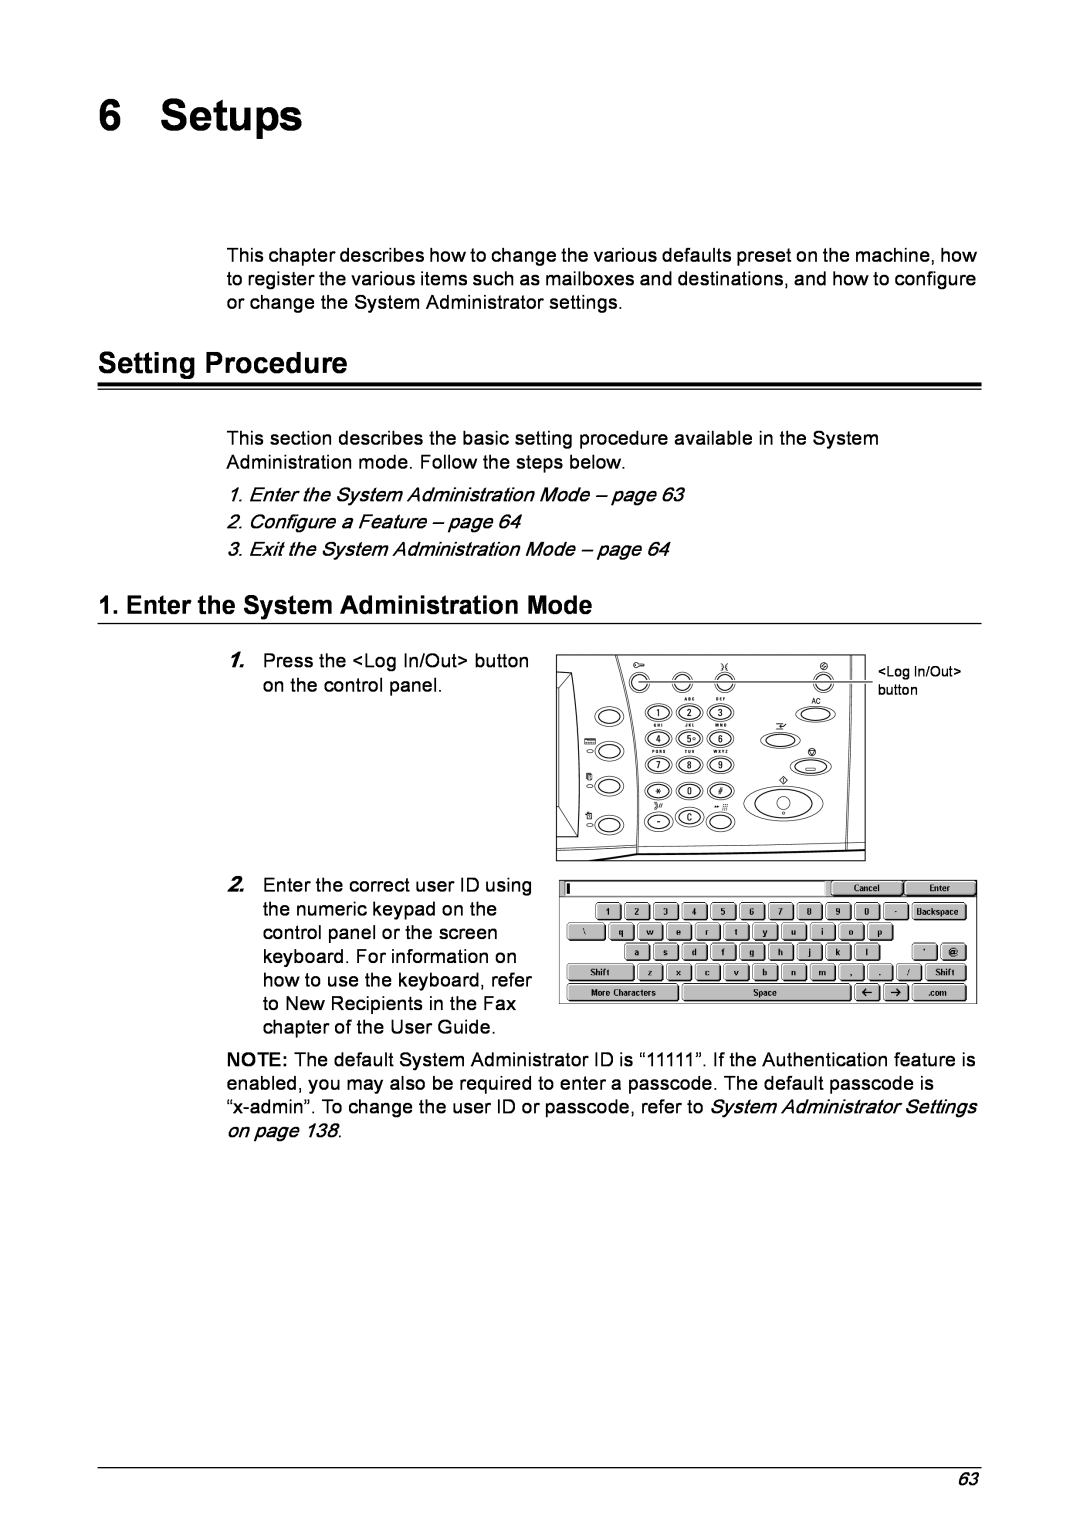 Xerox 5222 manual Setups, Setting Procedure, Enter the System Administration Mode – page, Configure a Feature – page 